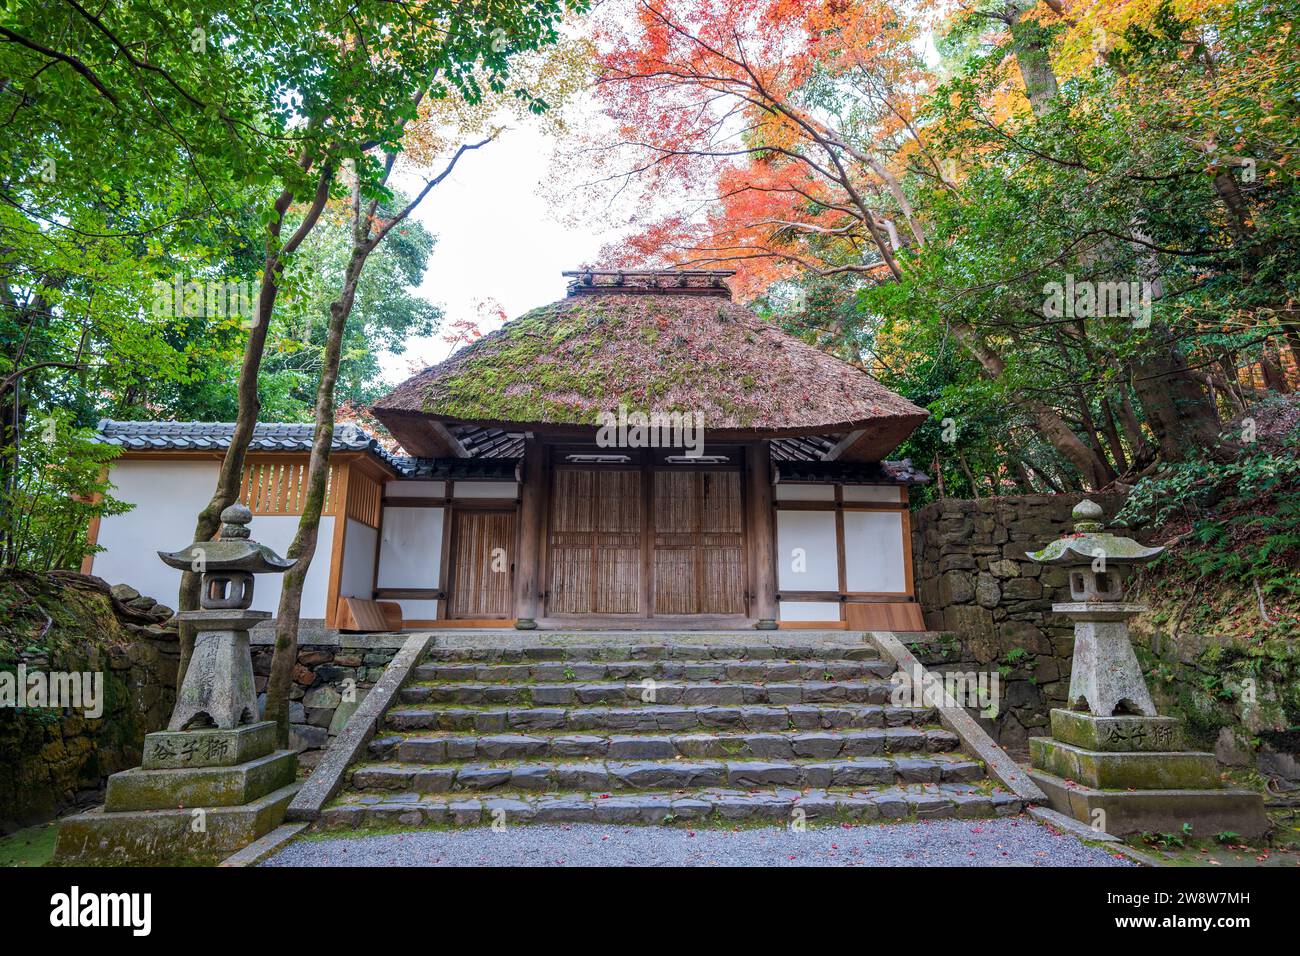 Gate to Honen-in Temple. Maple trees turn red in autumn. Kyoto, Japan. Stock Photo